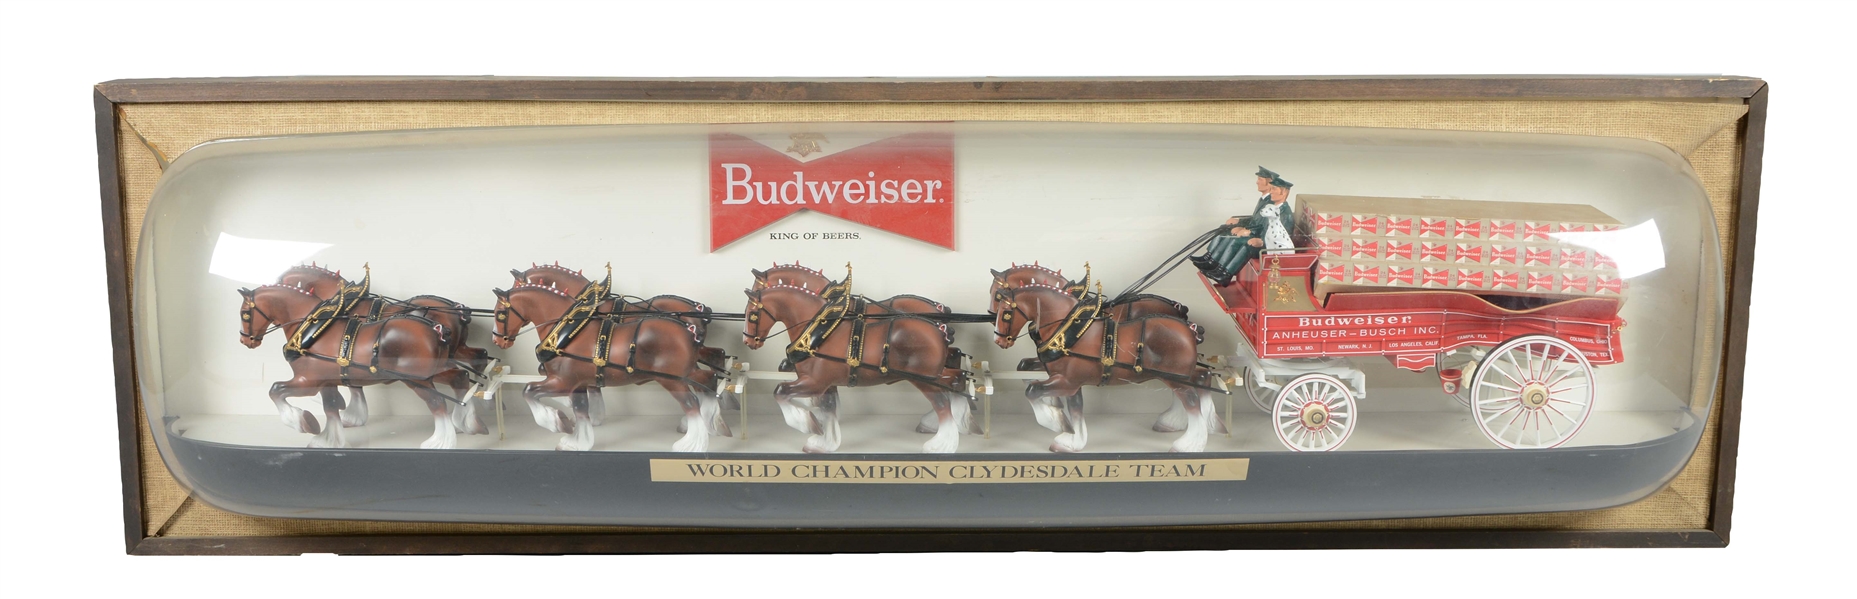 LIGHTED BUDWEISER "WORLD CHAMPION CLYDESDALE TEAM" SIGN. 